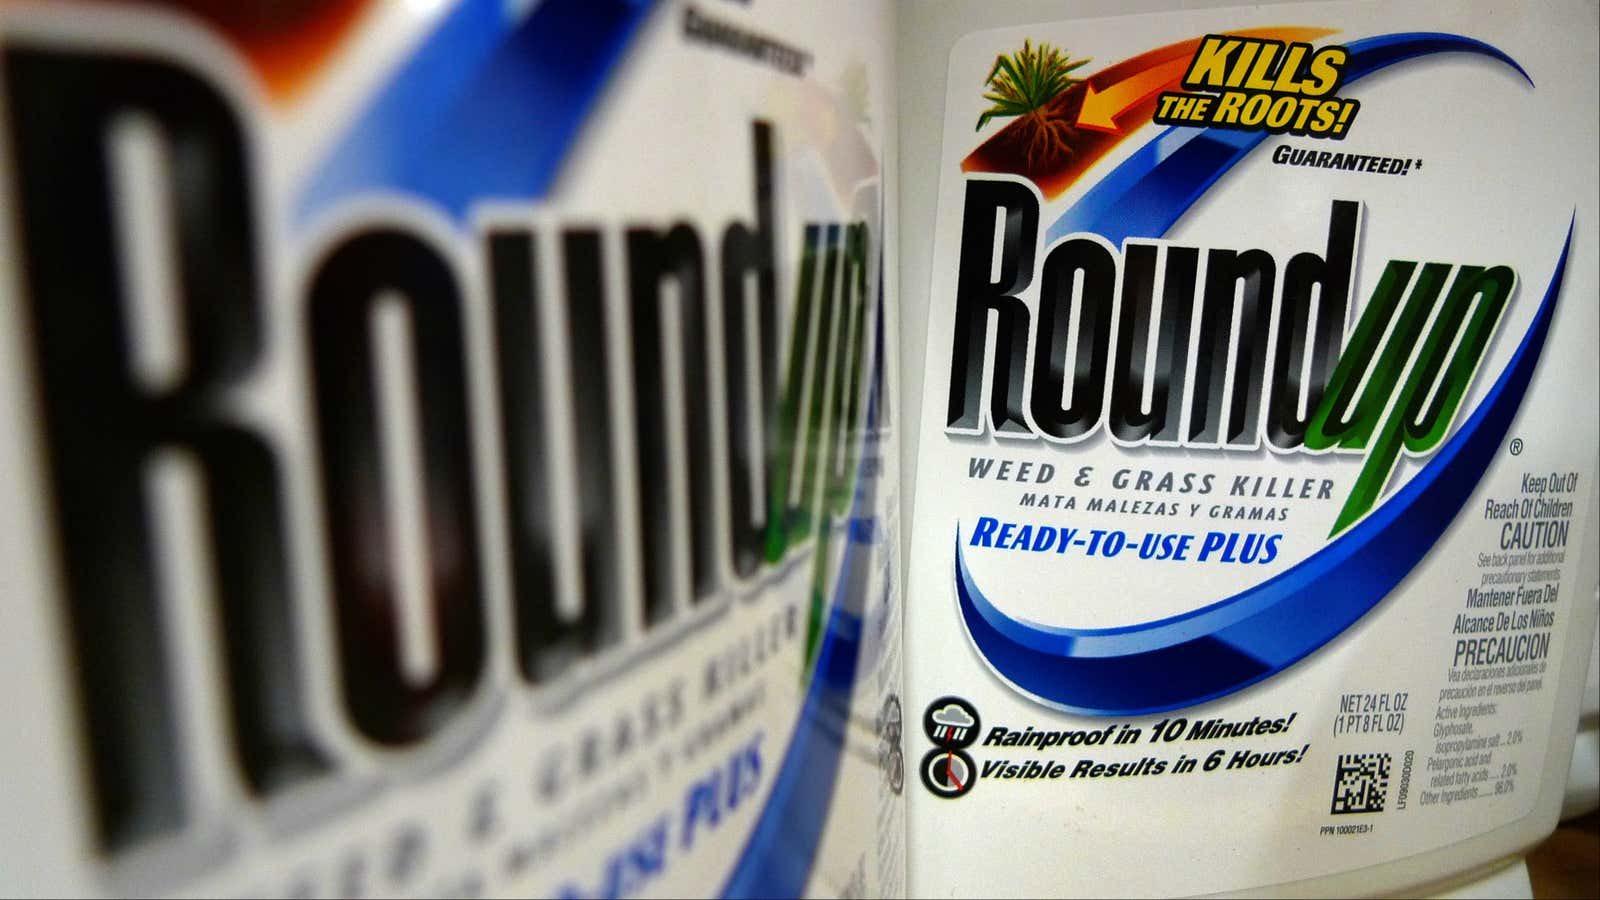 The FDA is finding traces of  glyphosate in the food supply.